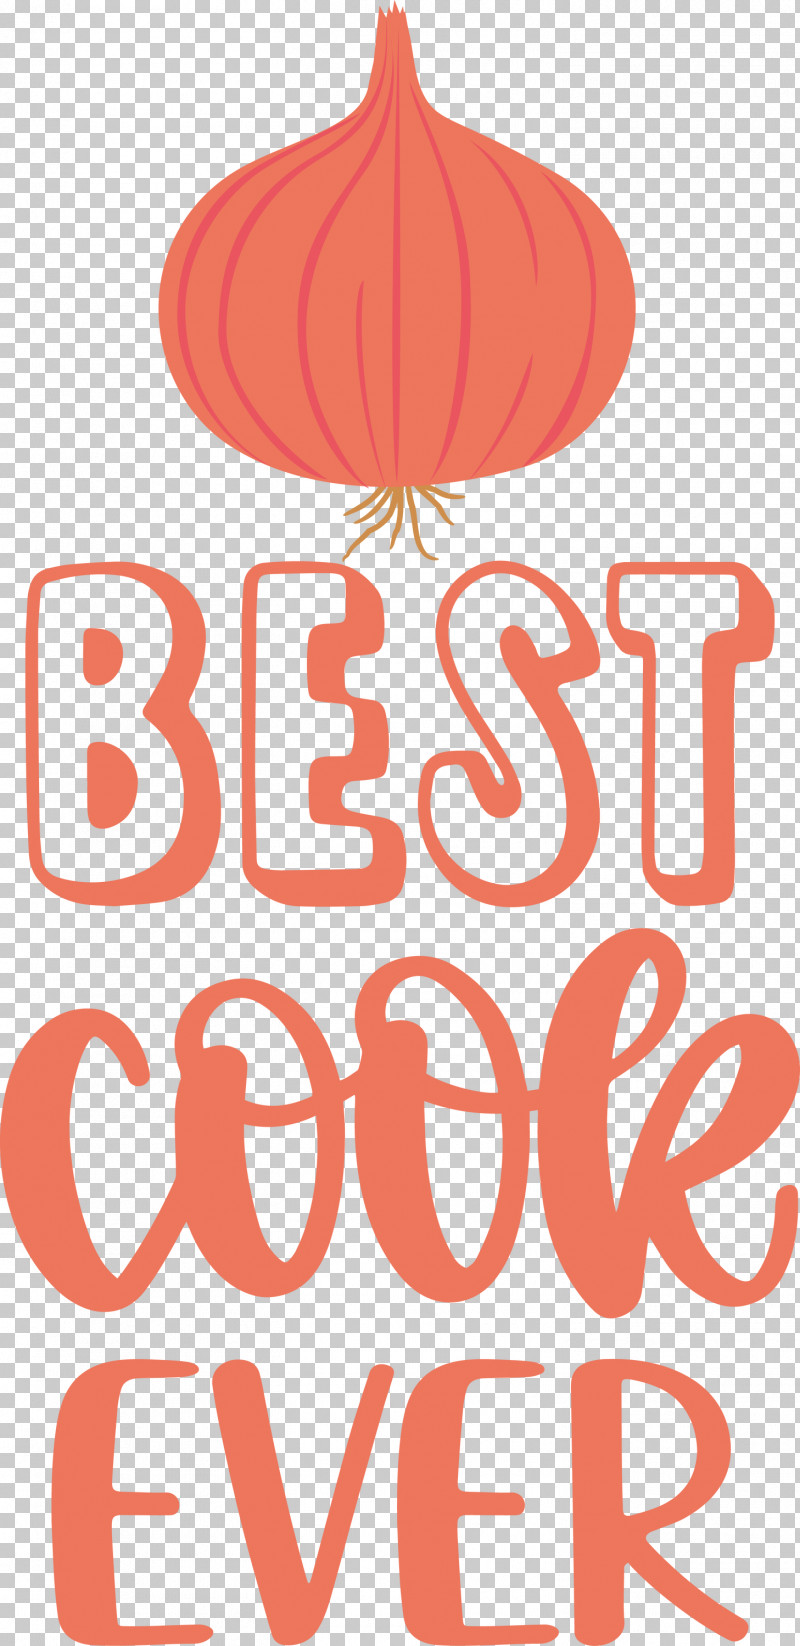 Best Cook Ever Food Kitchen PNG, Clipart, Food, Geometry, Kitchen, Line, Logo Free PNG Download